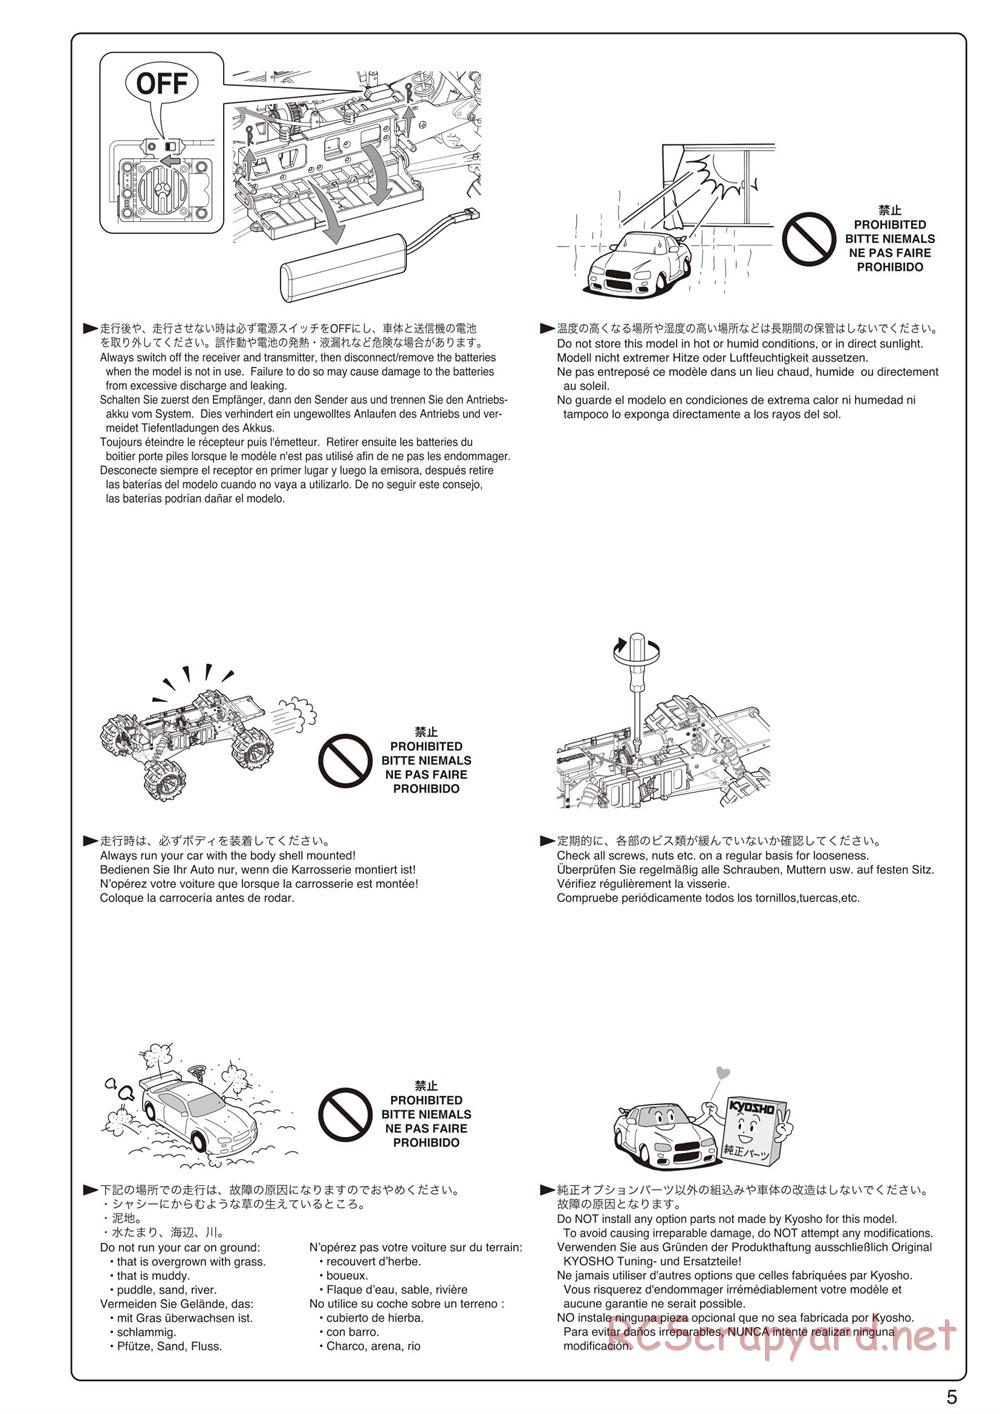 Kyosho - FO-XX VE - Manual - Page 5